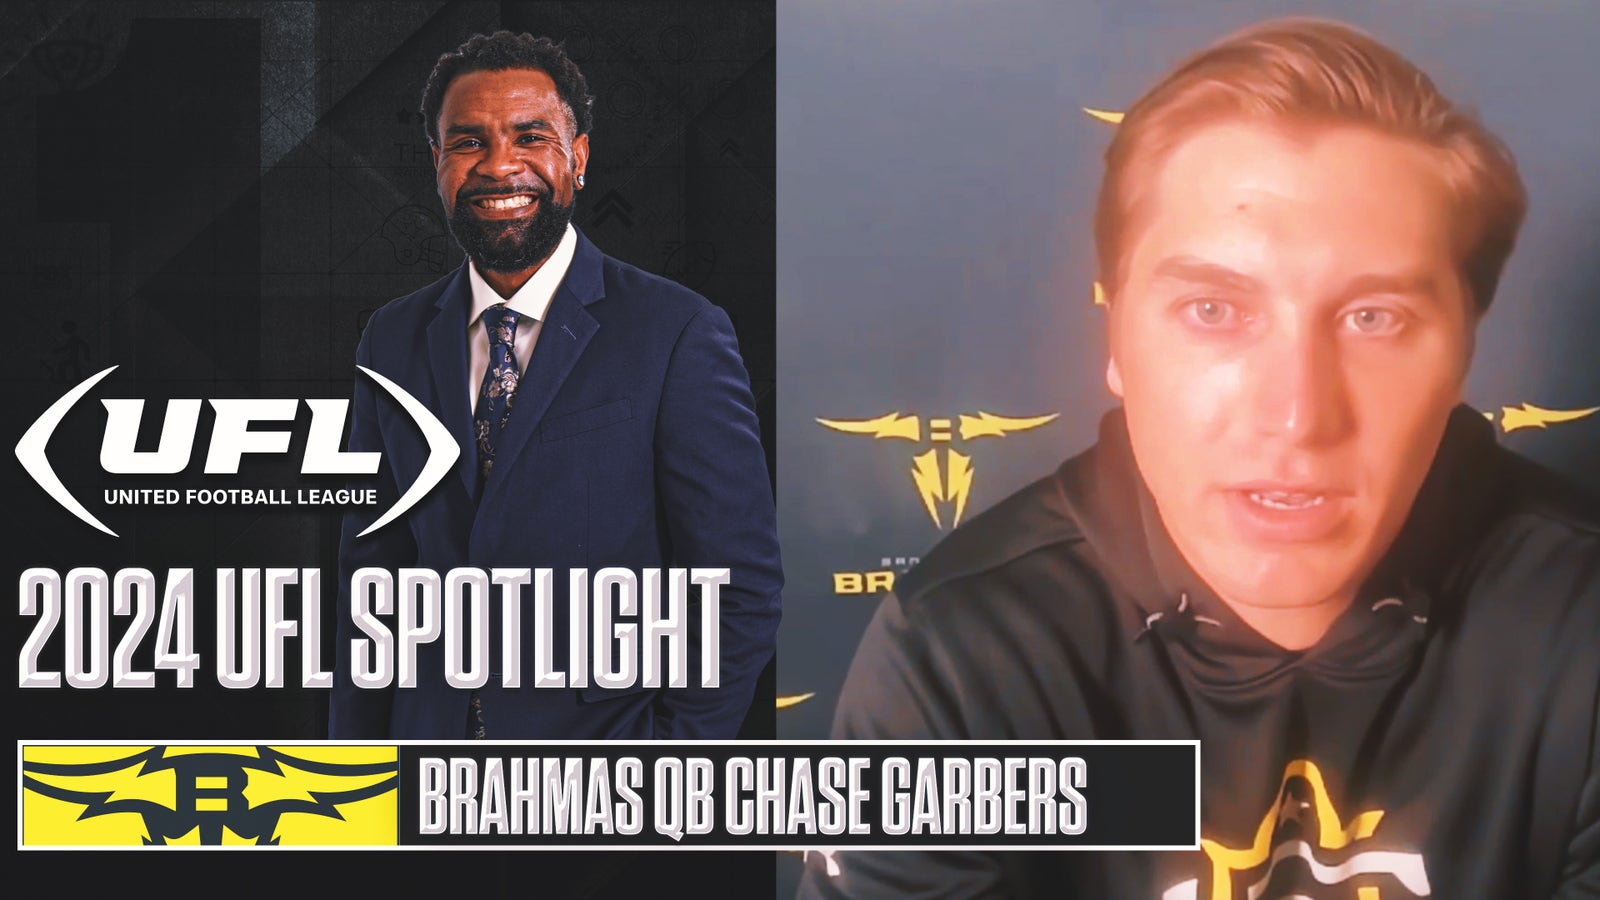 Brahmas QB Chase Garbers joins the show to talk about playing in the UFL